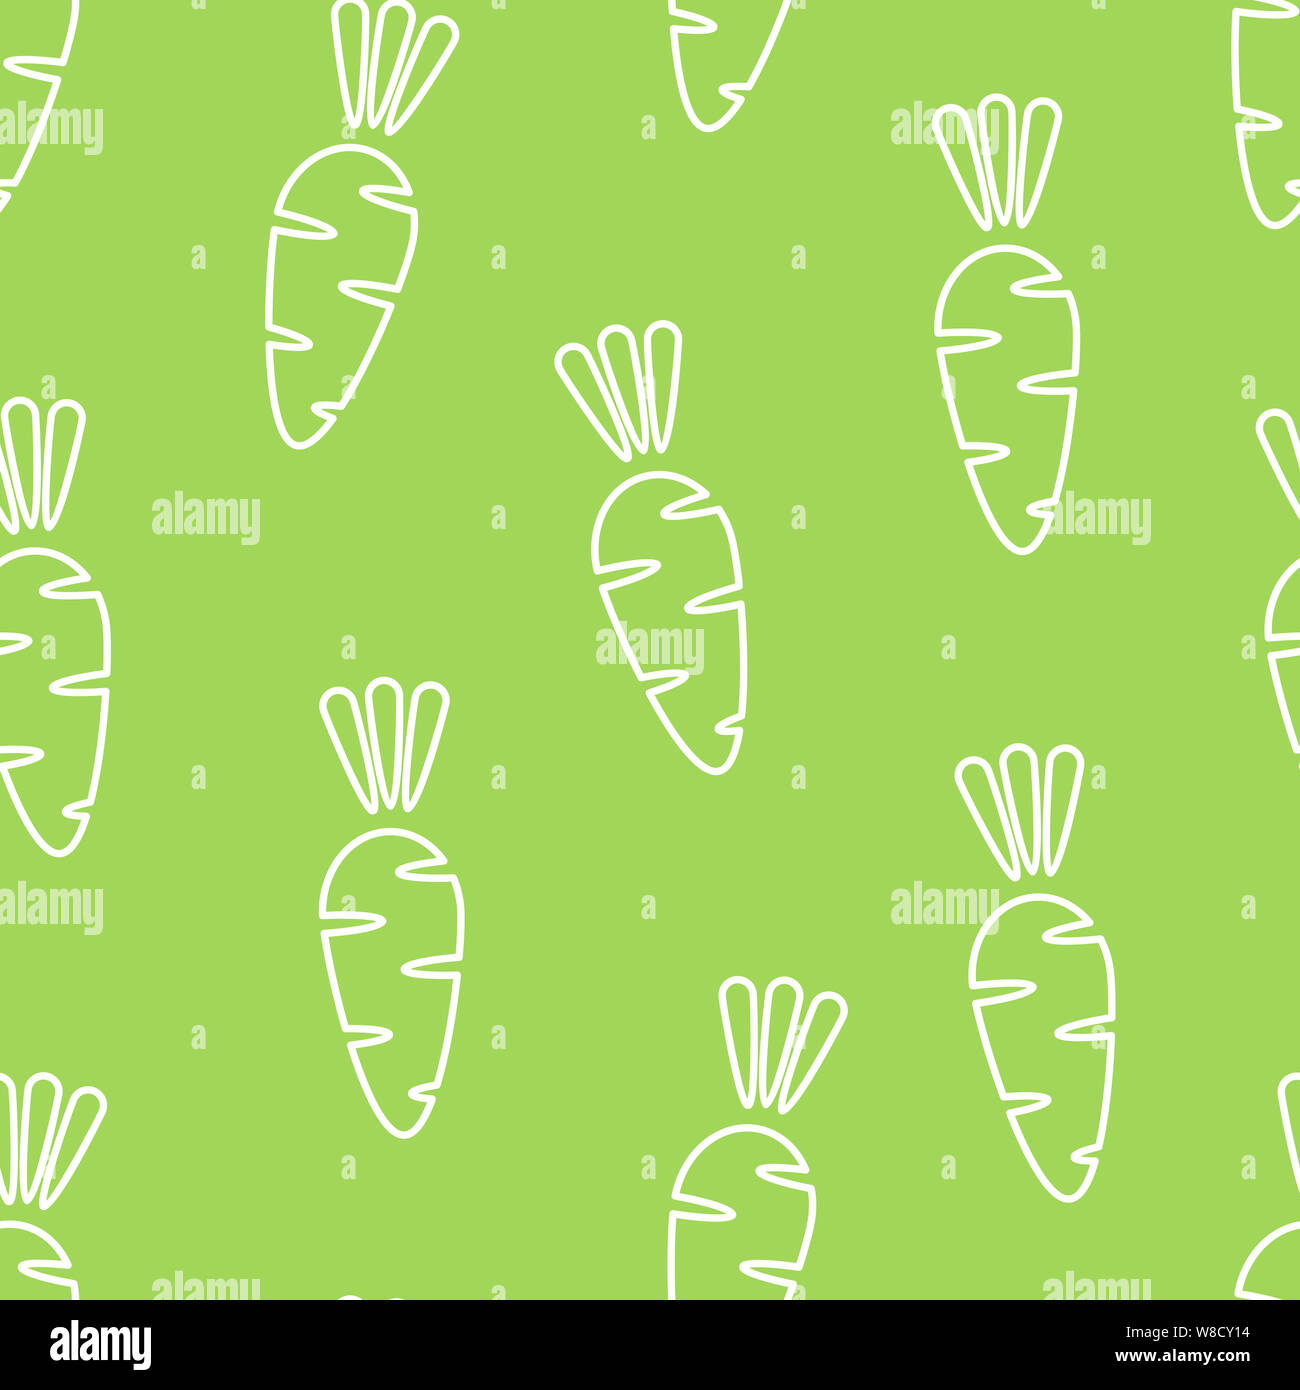 Carrot silhouette seamless vegetable pattern flat illustration. Natural food pattern design with outline carrot vegetable seamless texture in green and white colors for wrapping paper Stock Photo